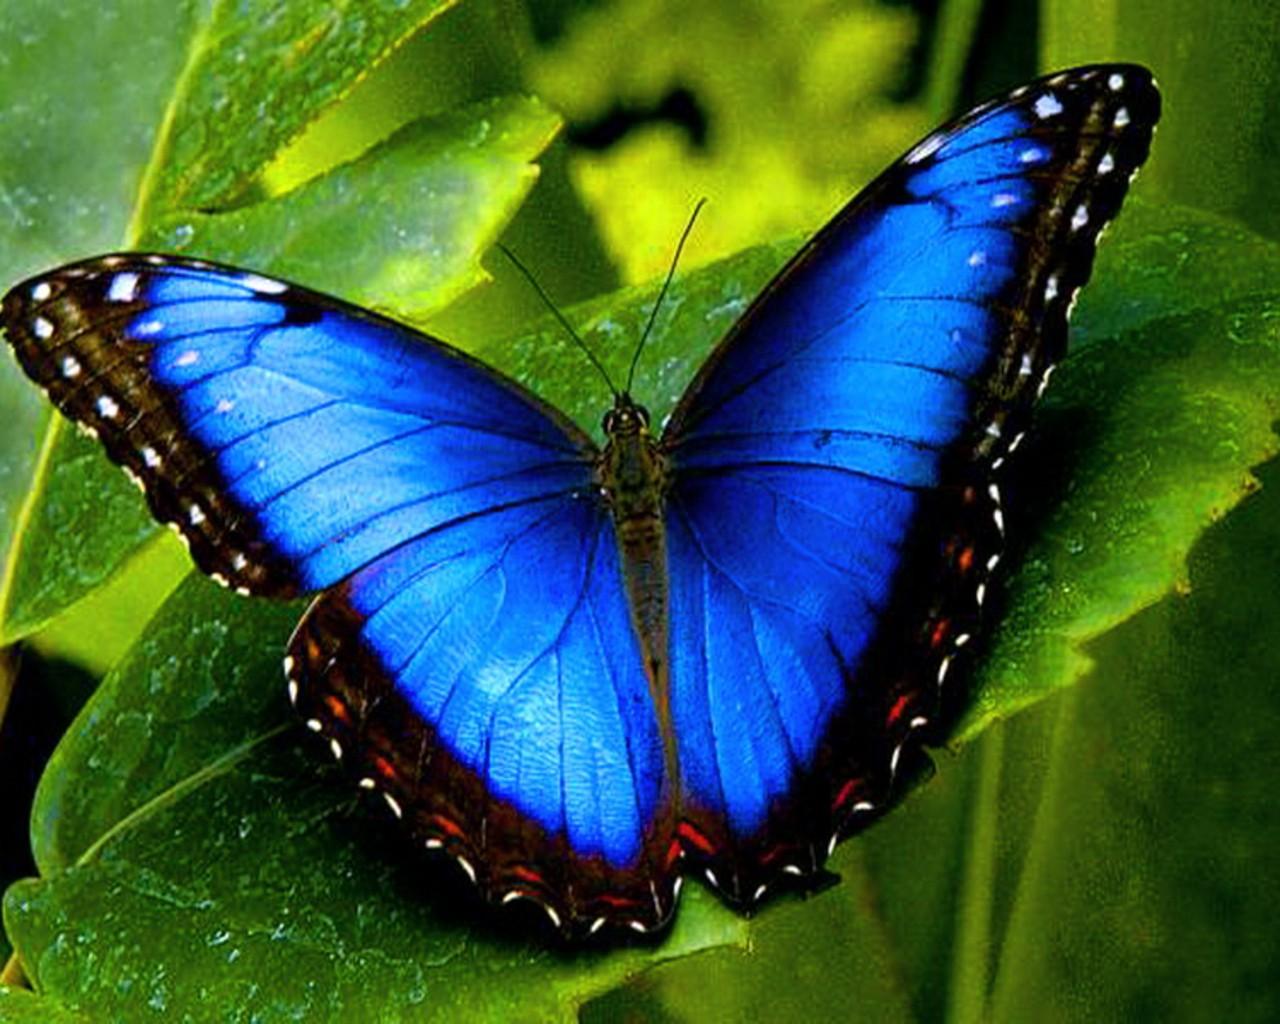 Colorful 【Butterfly】HD Free Image Wallpaper Download